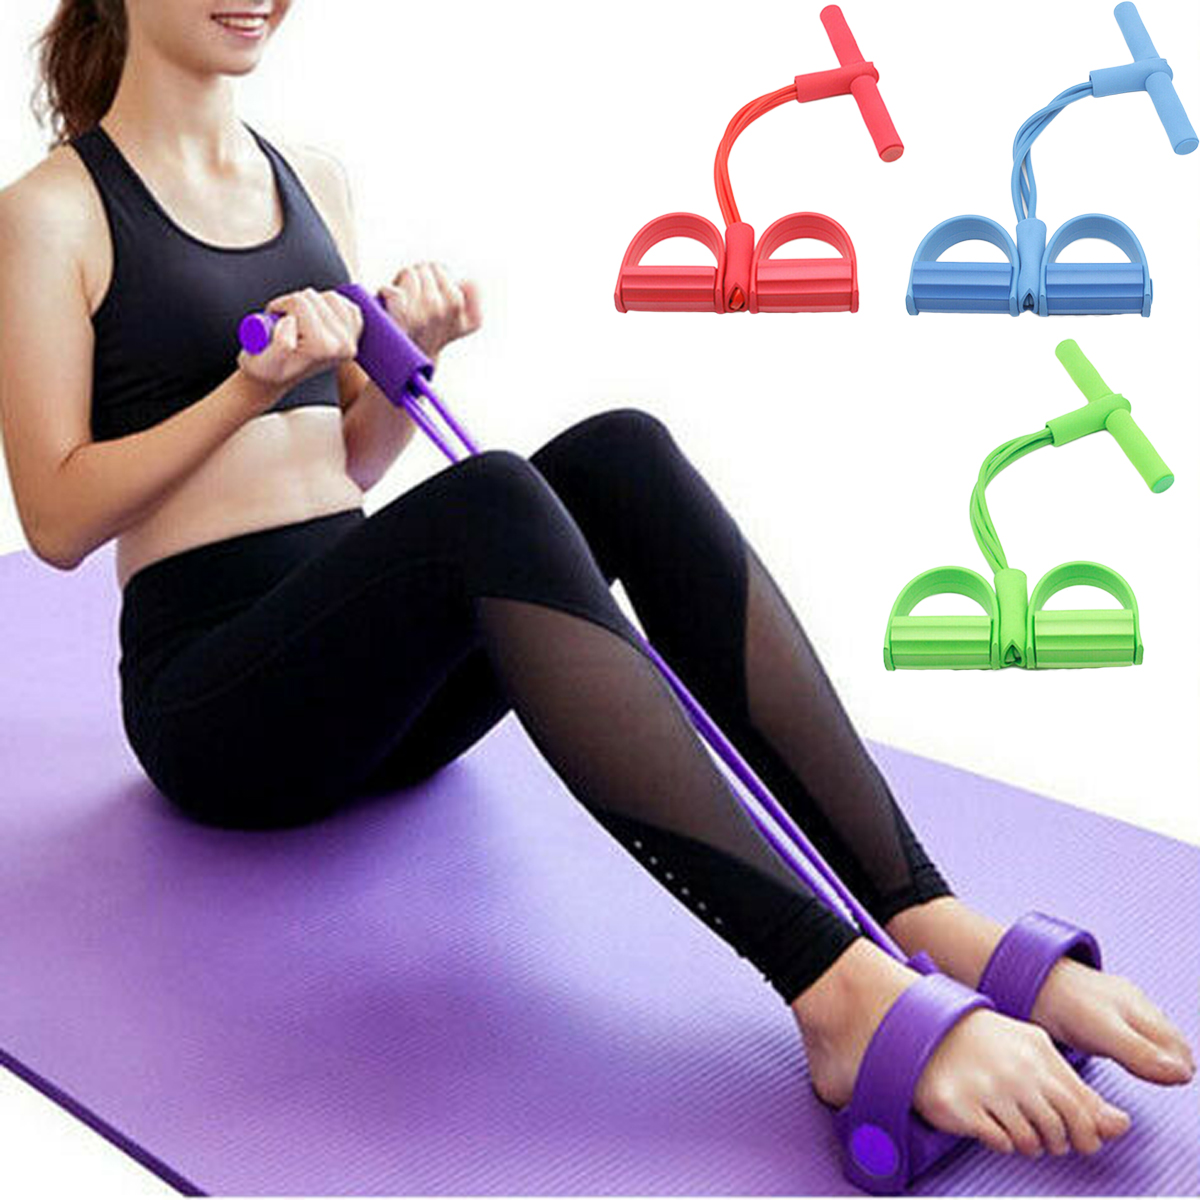 foot pedal exerciser